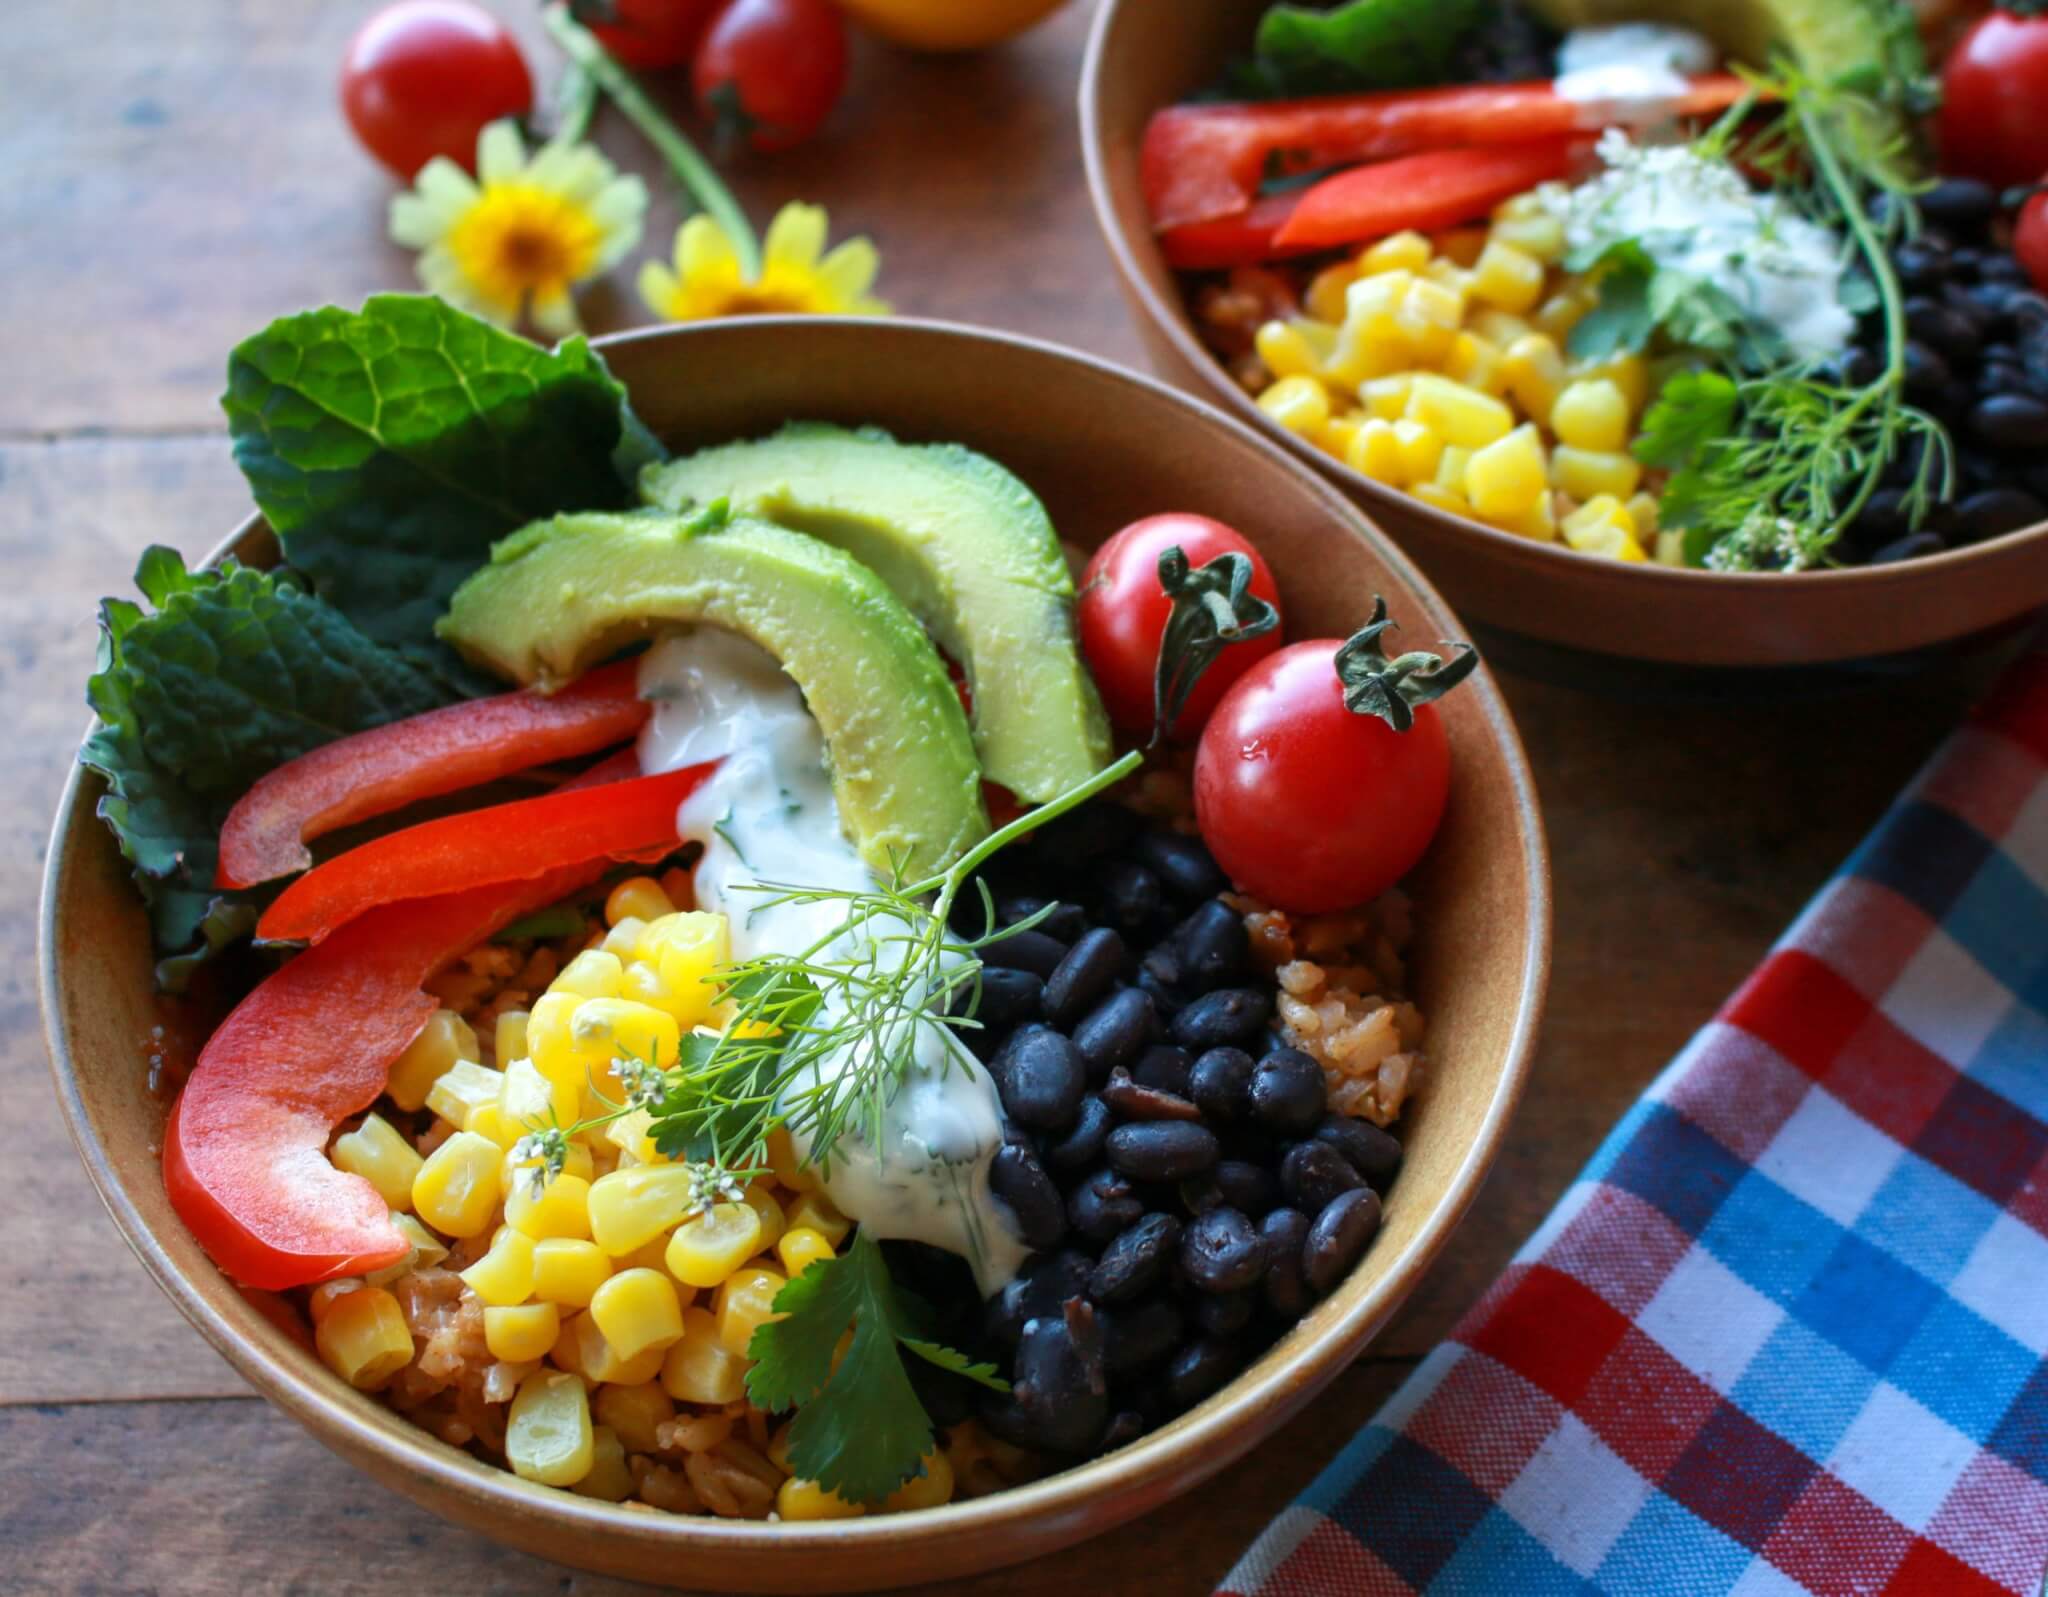 Chipotle Tomato Rice Power Bowl topped with avocado, black beans, red bell pepper, corn, tomatoes, and dip